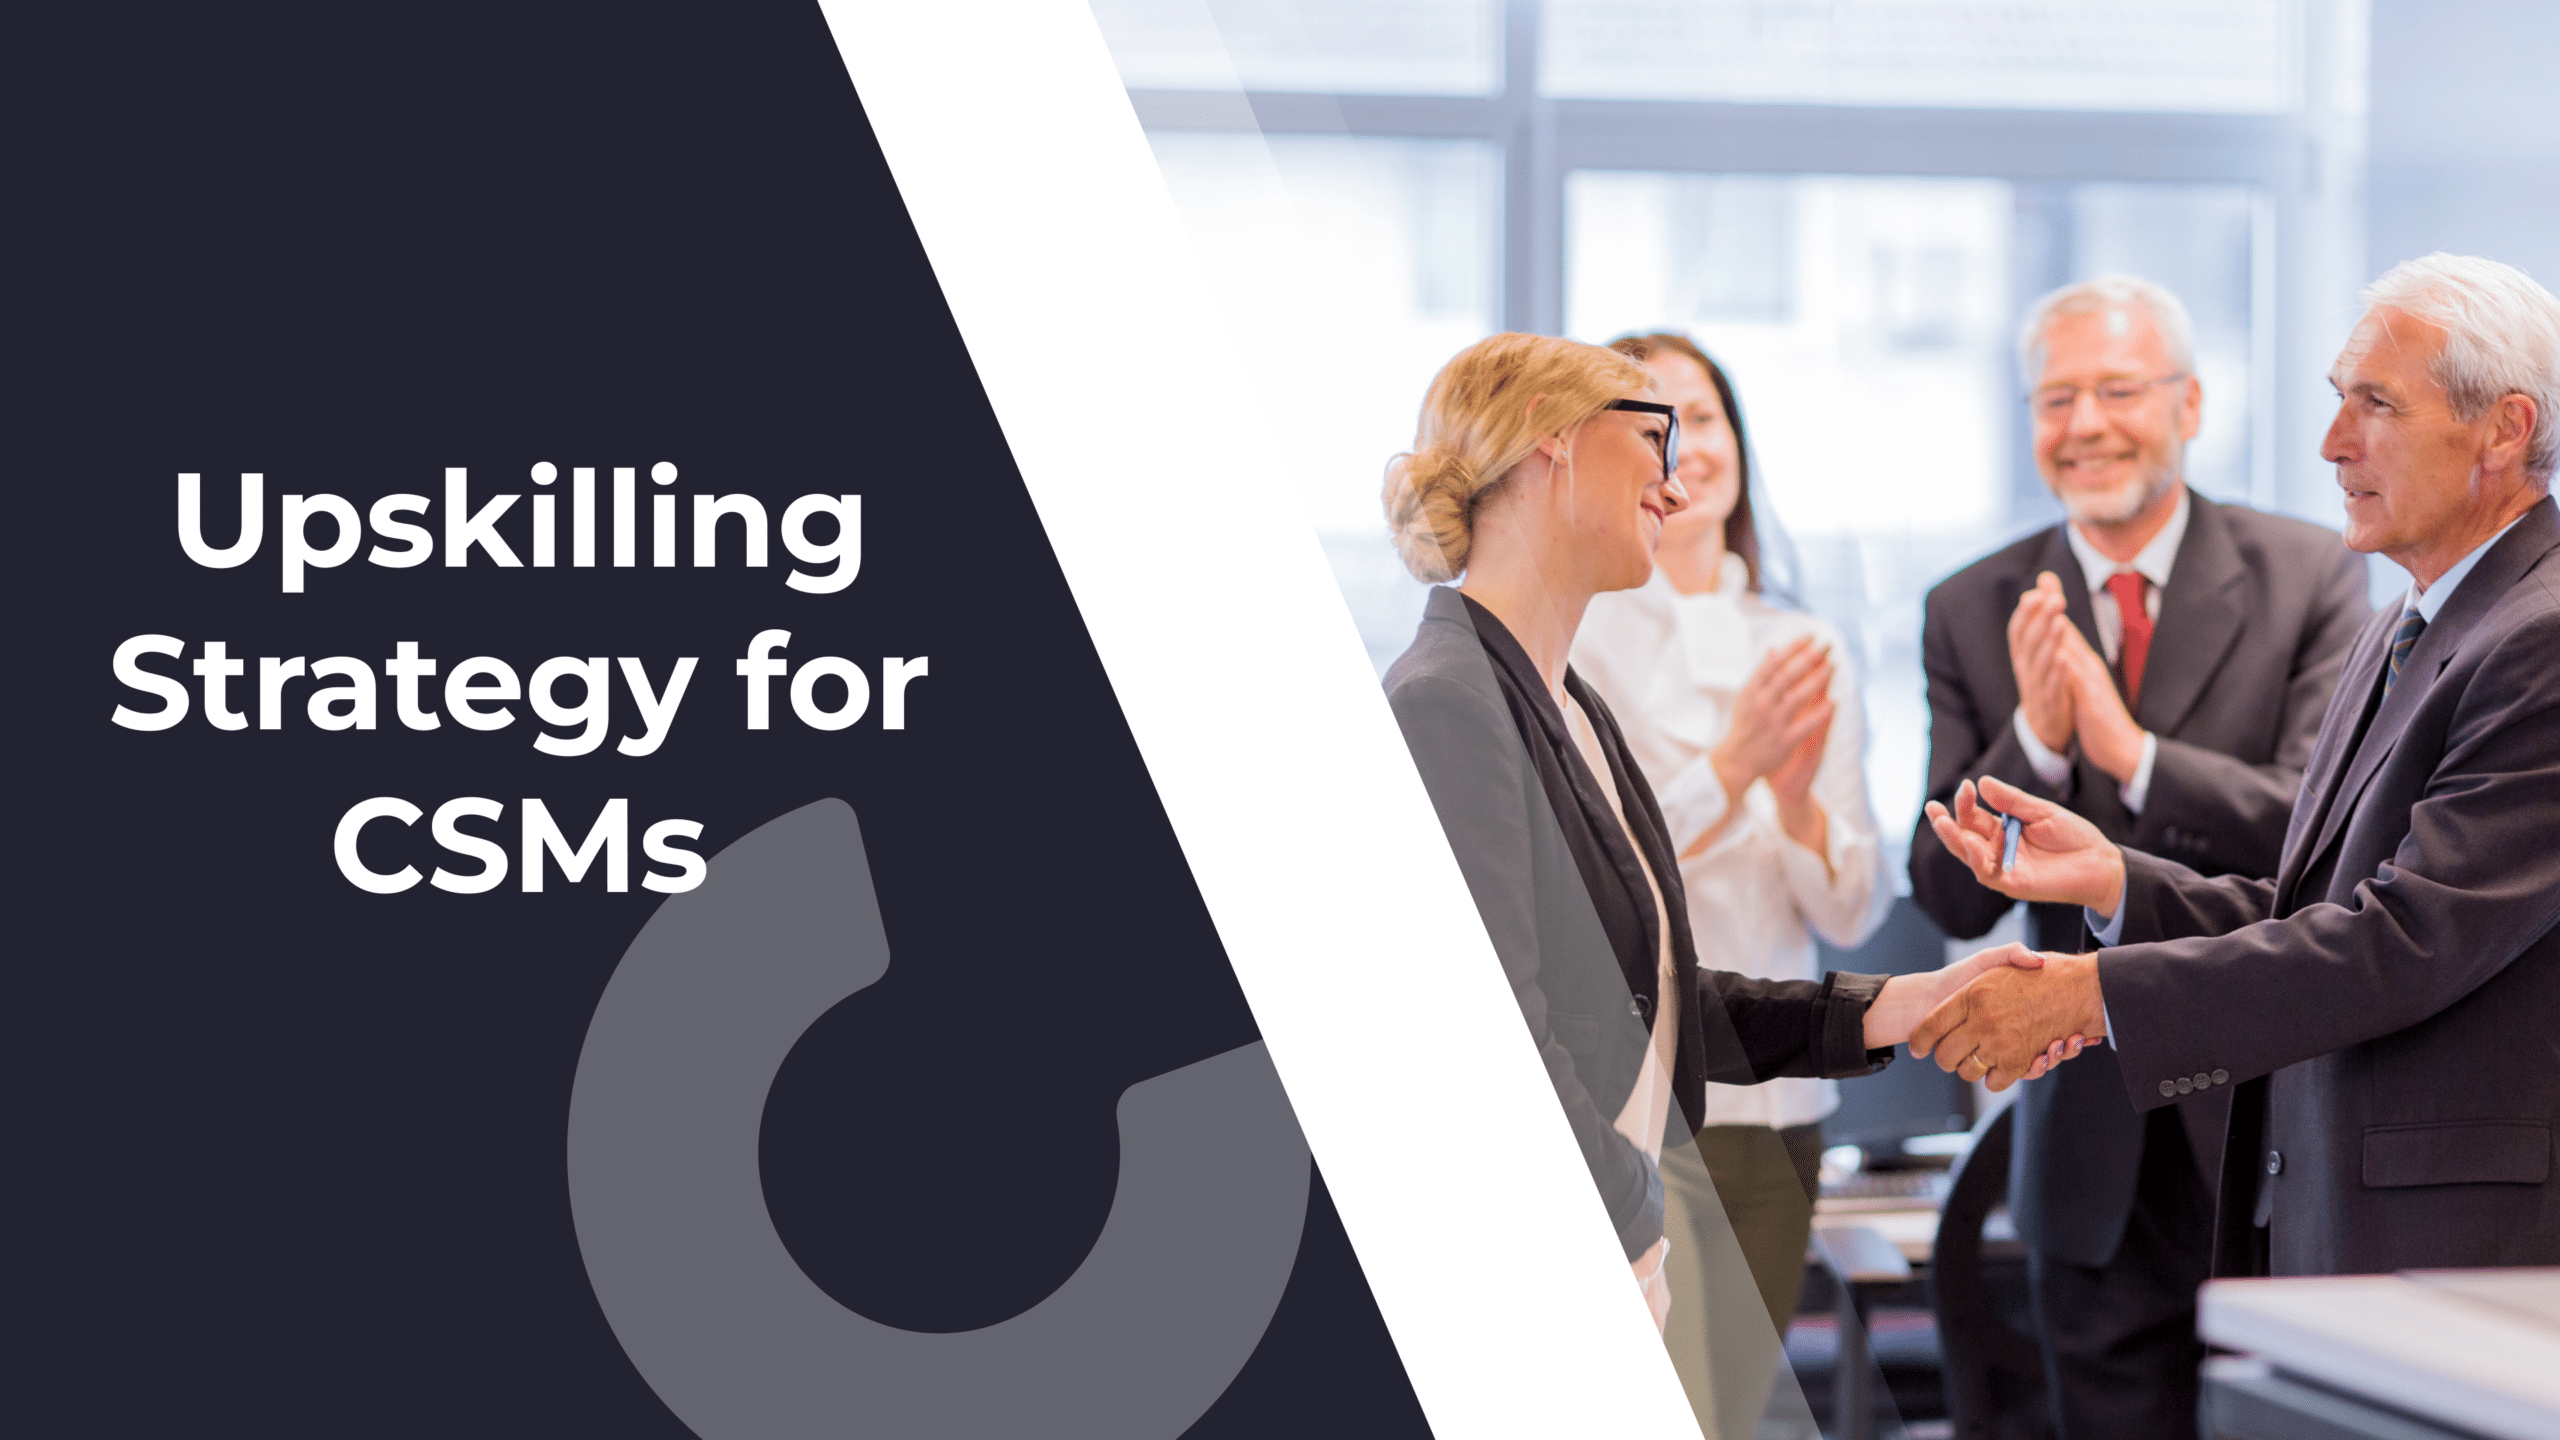 How an Upskilling Strategy Can Level Up Your CSMs